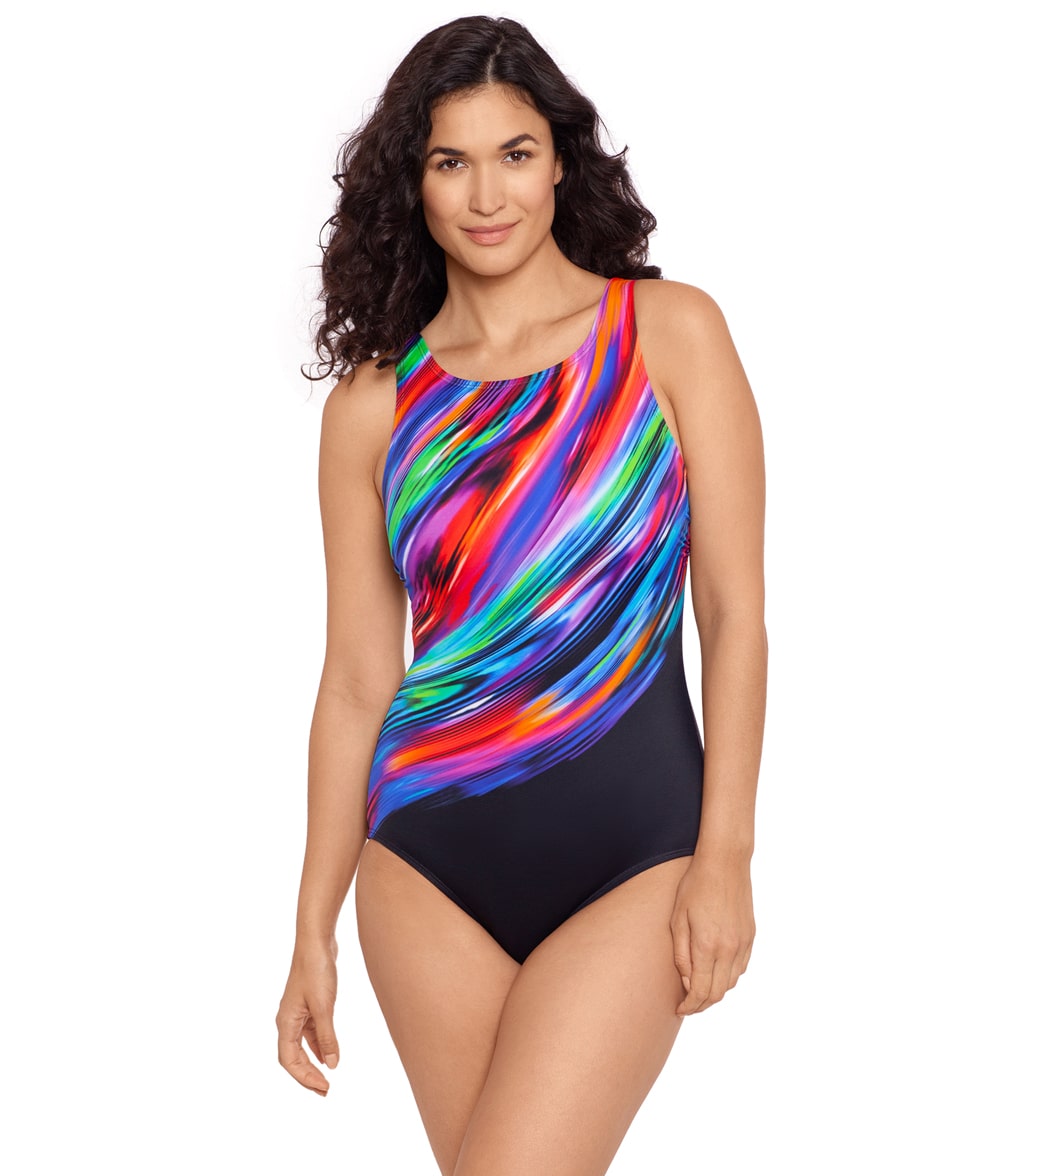 Reebok Women's Glowing Strong High Neck Chlorine Resistant One Piece Swimsuit - Multi 12 - Swimoutlet.com